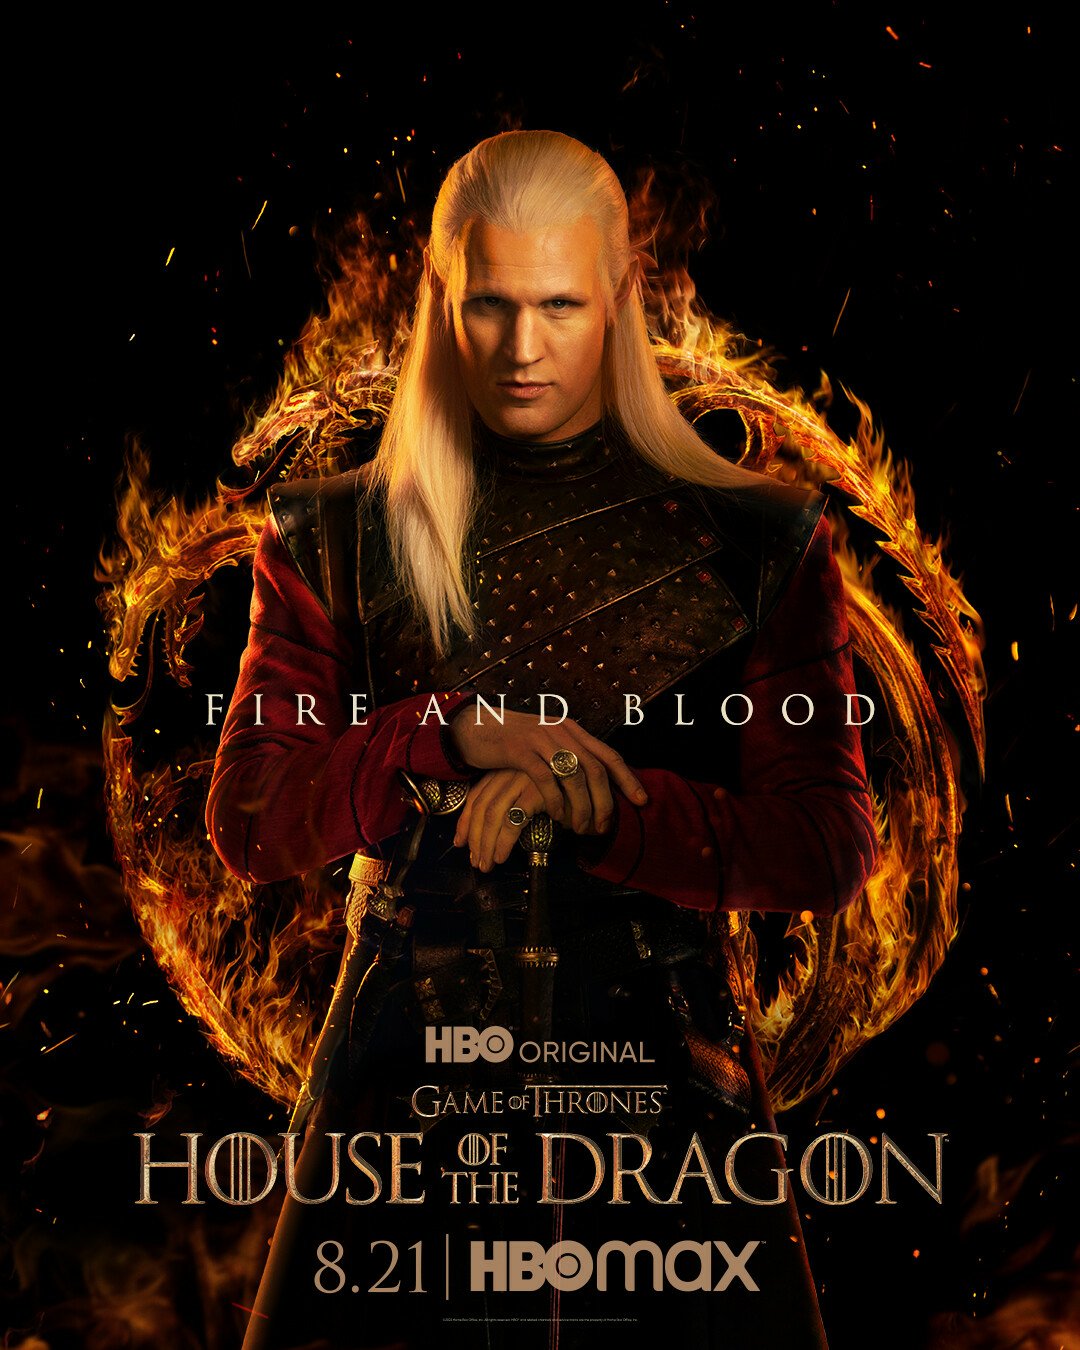 The House Of The Dragon': Spectacular Trailer For The Prequel To 'Game Of Thrones' With Which Hbo Max Will Compete With 'The Lord Of The Rings'